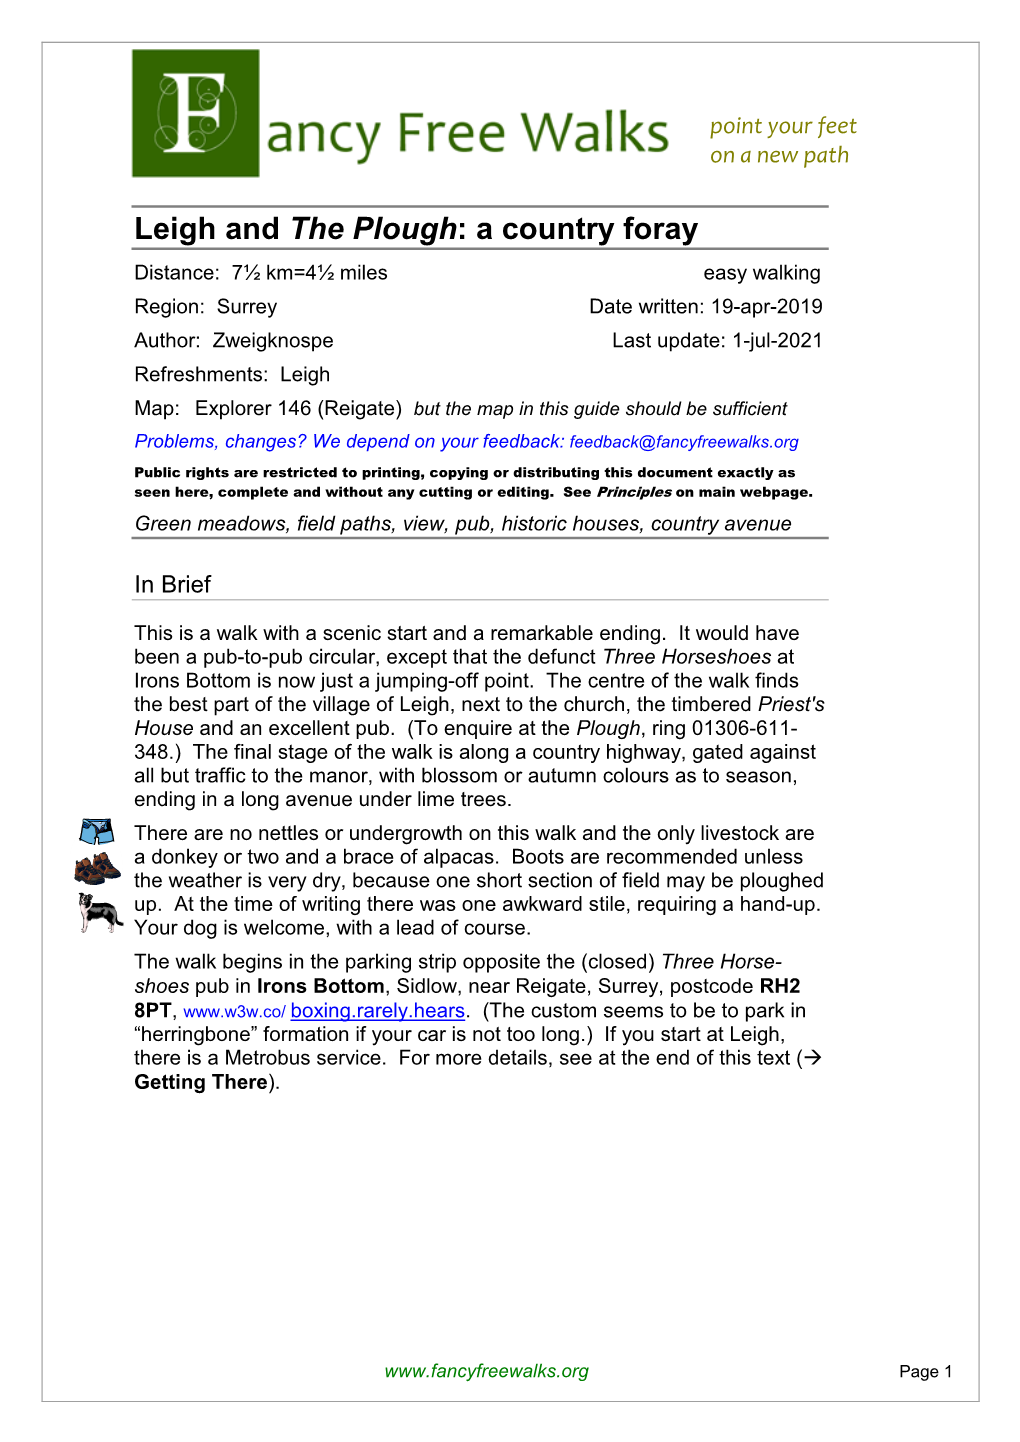 Leigh and the Plough: a Country Foray